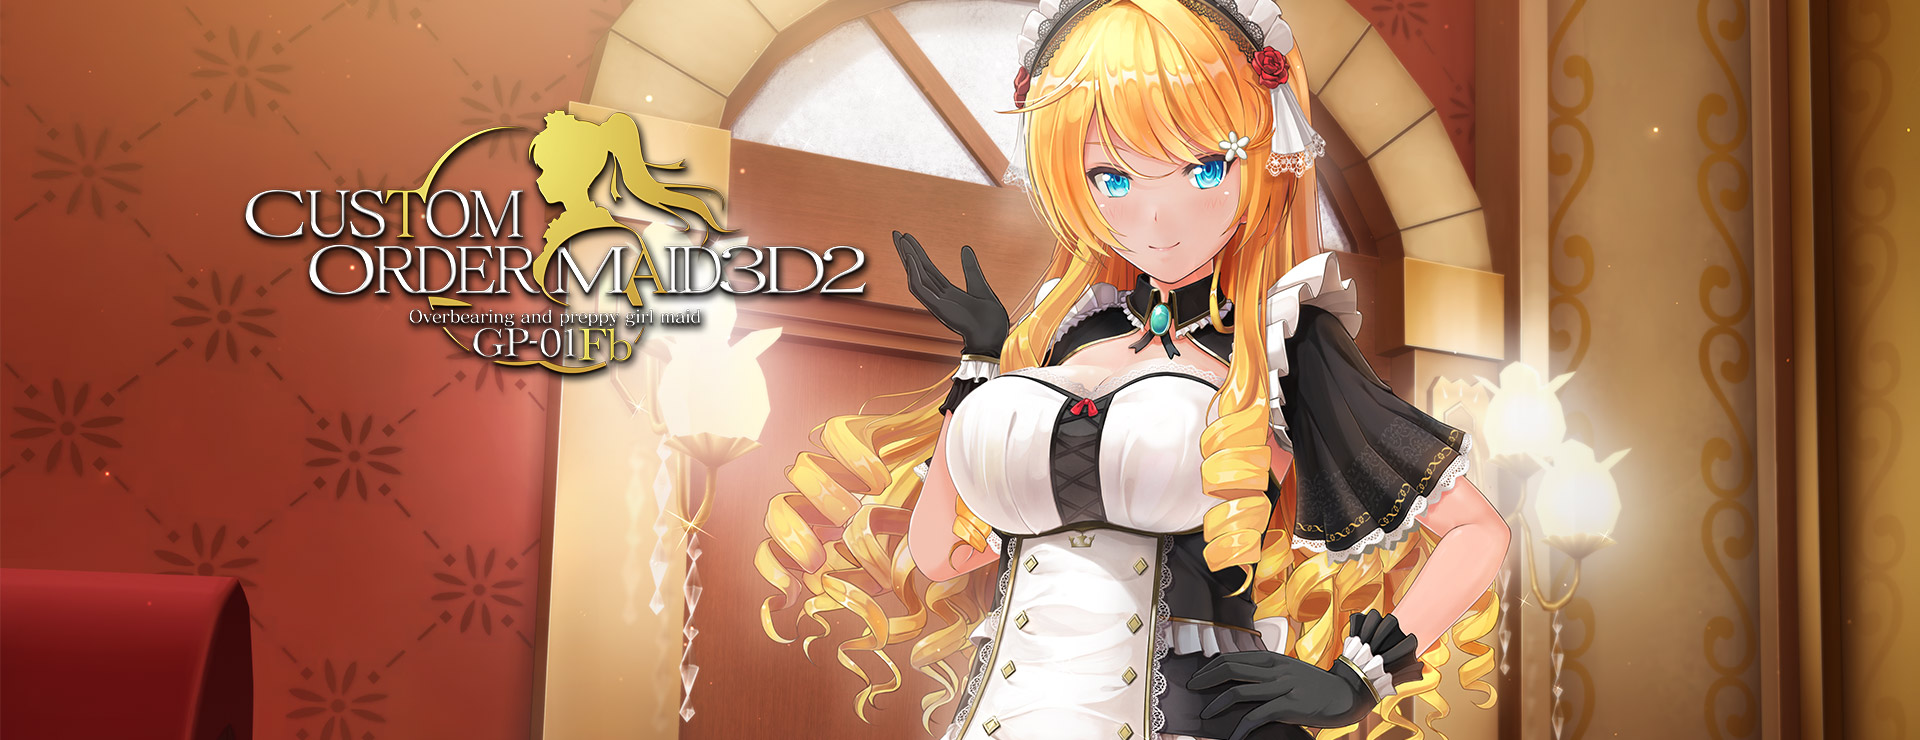 Custom Order Maid 3D2: Overbearing and Preppy Girl Maid GP-01Fb - Simulation Spiel